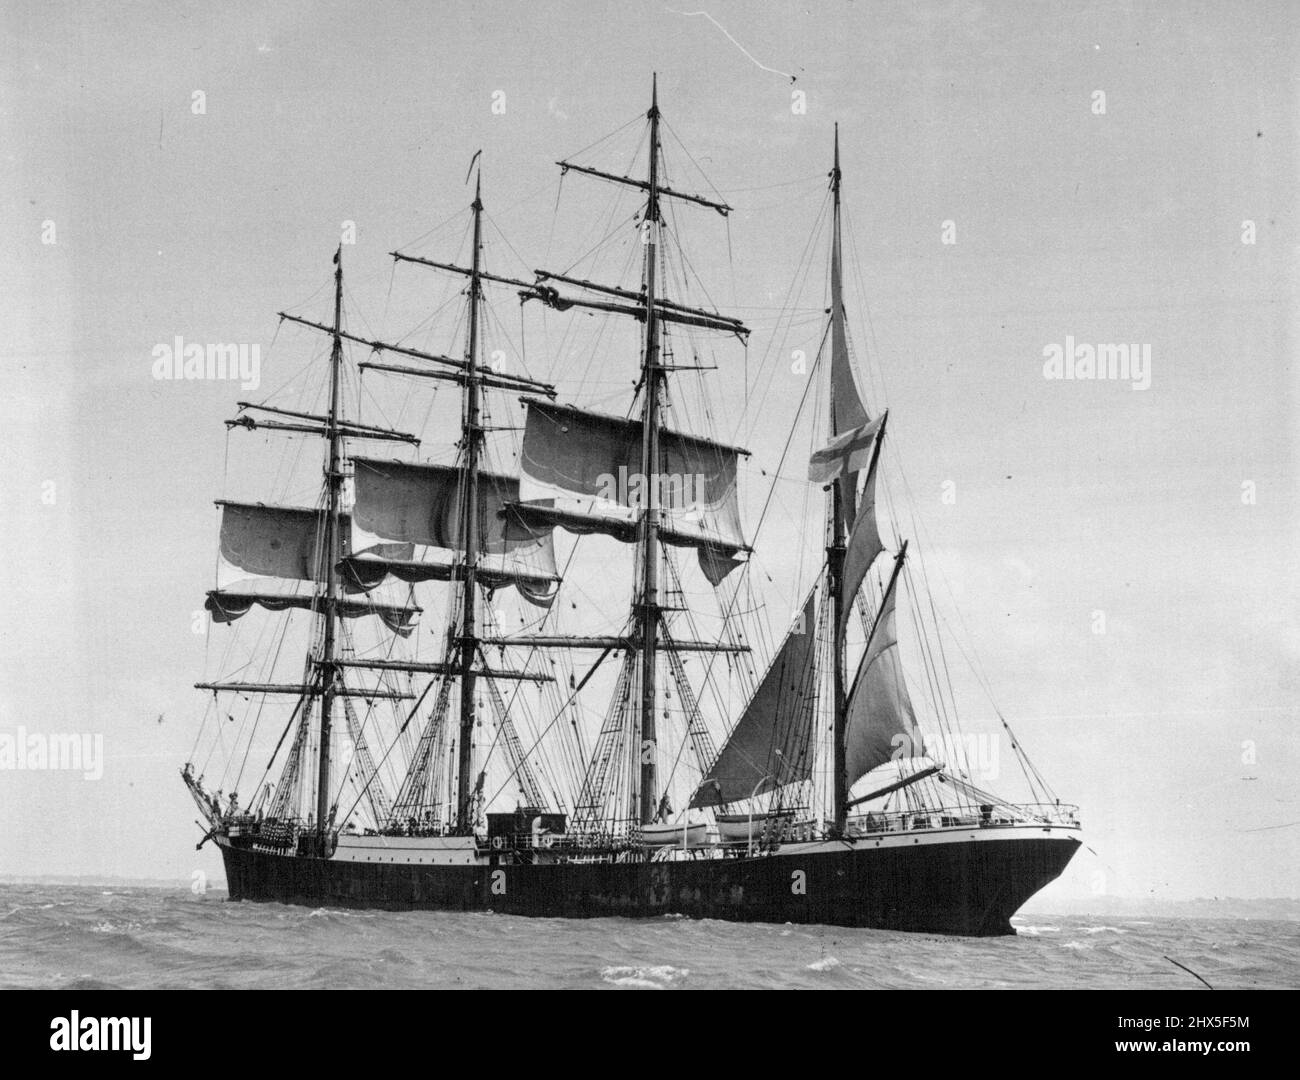 Arrival of the Finnish four-masted barque, Pamir, at Auckland after a voyage of 72 days from the Seychelles Group. Pictures taken as the vessel was shortening sail before entering the harbour and after berthing at King's Wharf. March 11, 1938. Stock Photo